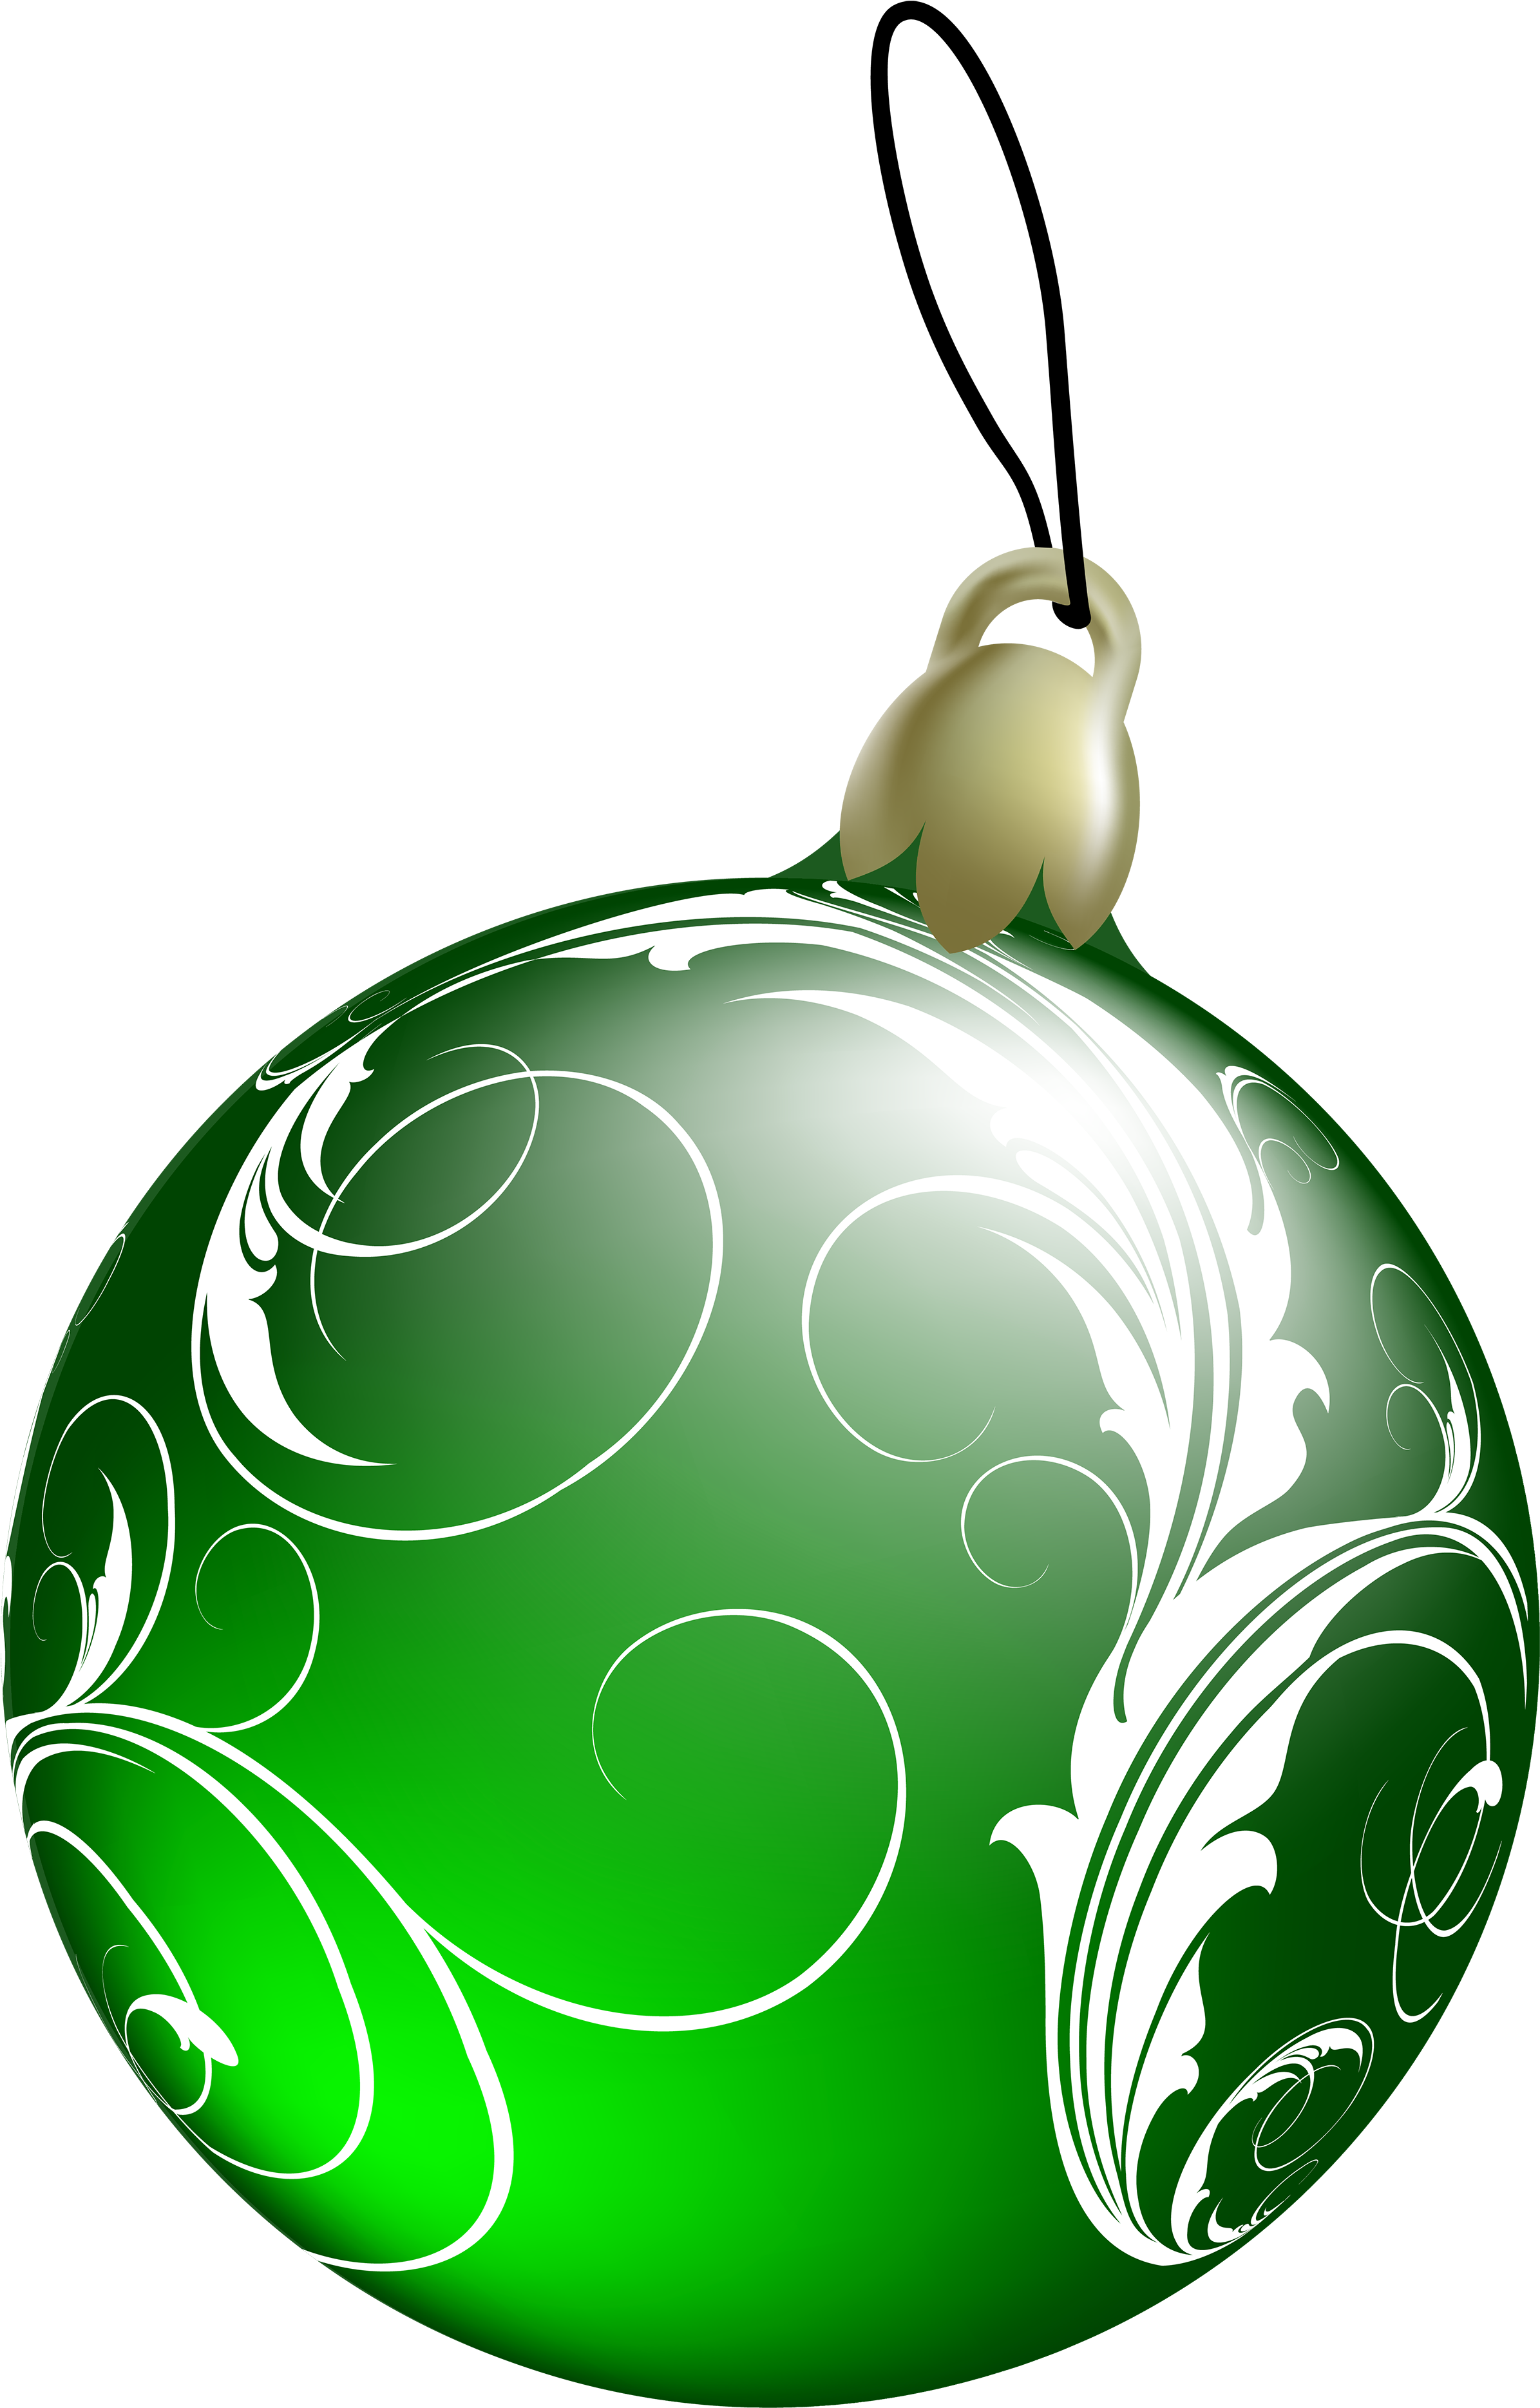 Green Christmas Ornaments PNG Transparent Image